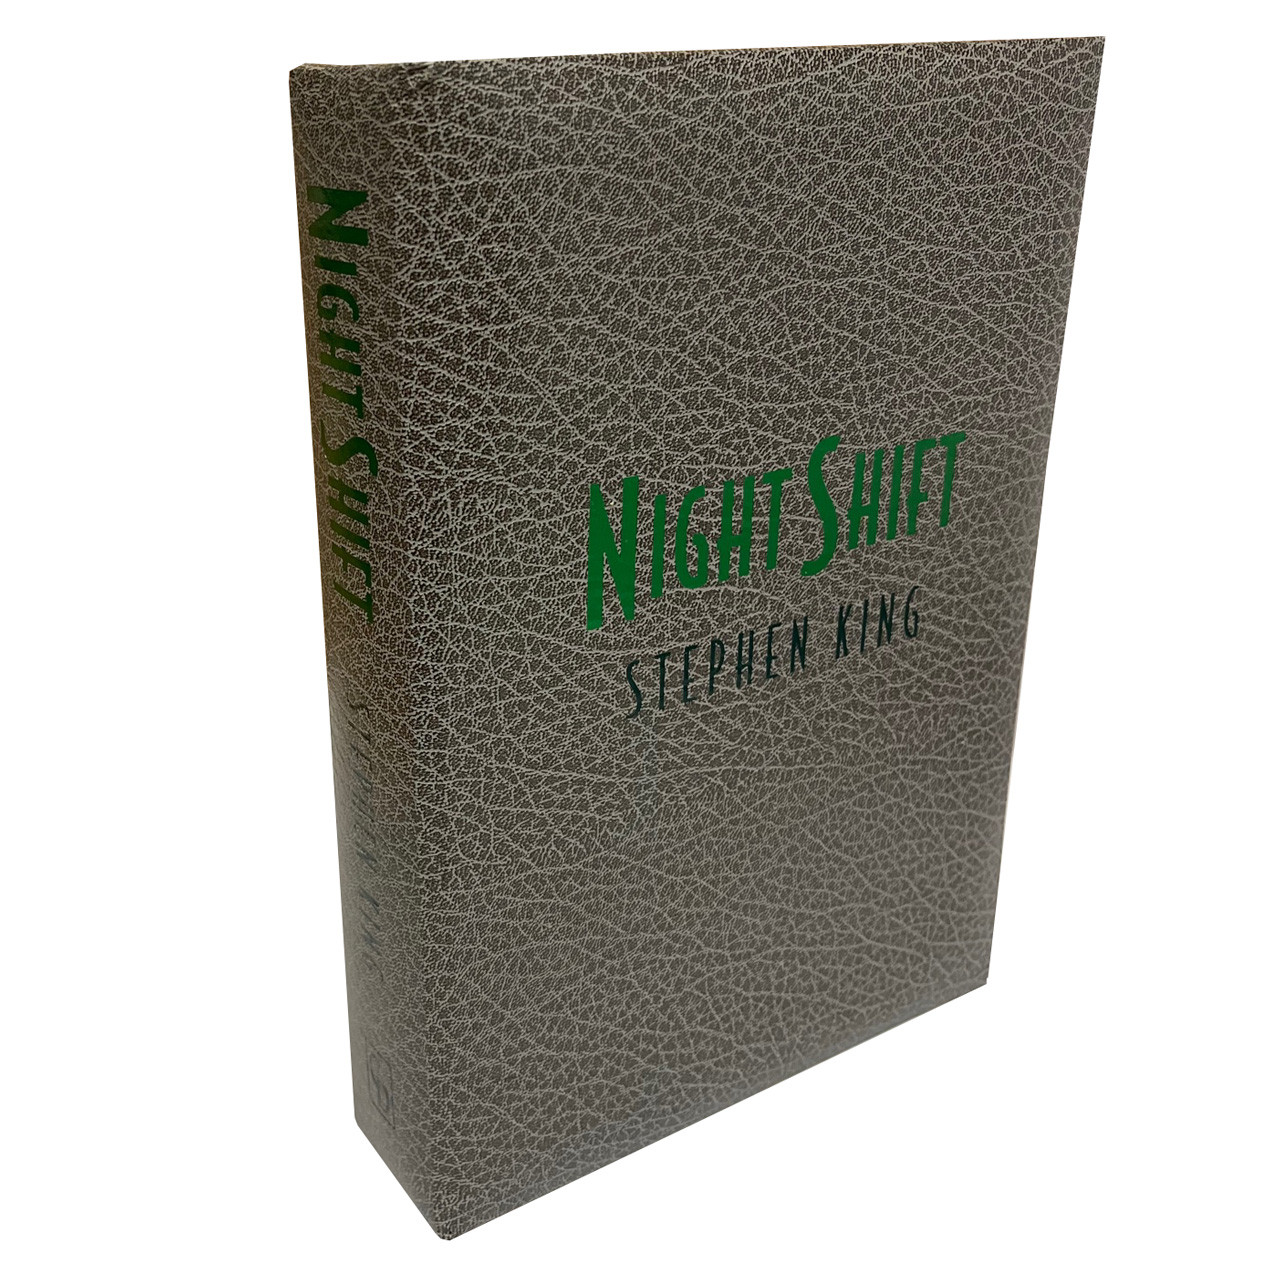 Stephen King, The Doubleday Years "Night Shift" Signed Lettered Artist Edition "WW" of 52, Remarqued by Glenn Chadbourne [Very Fine]